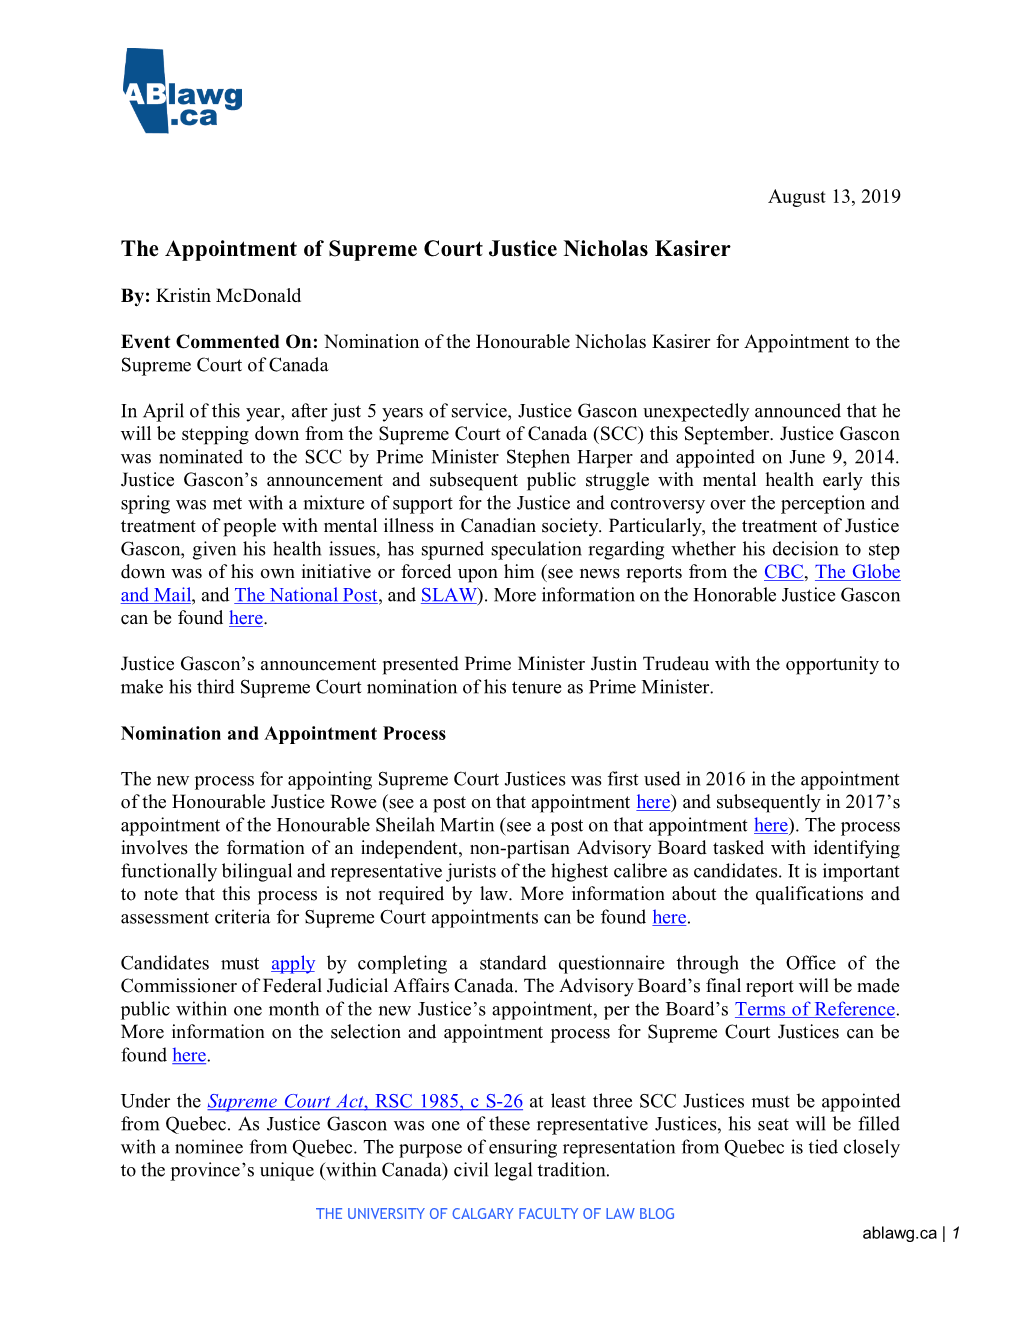 The Appointment of Supreme Court Justice Nicholas Kasirer